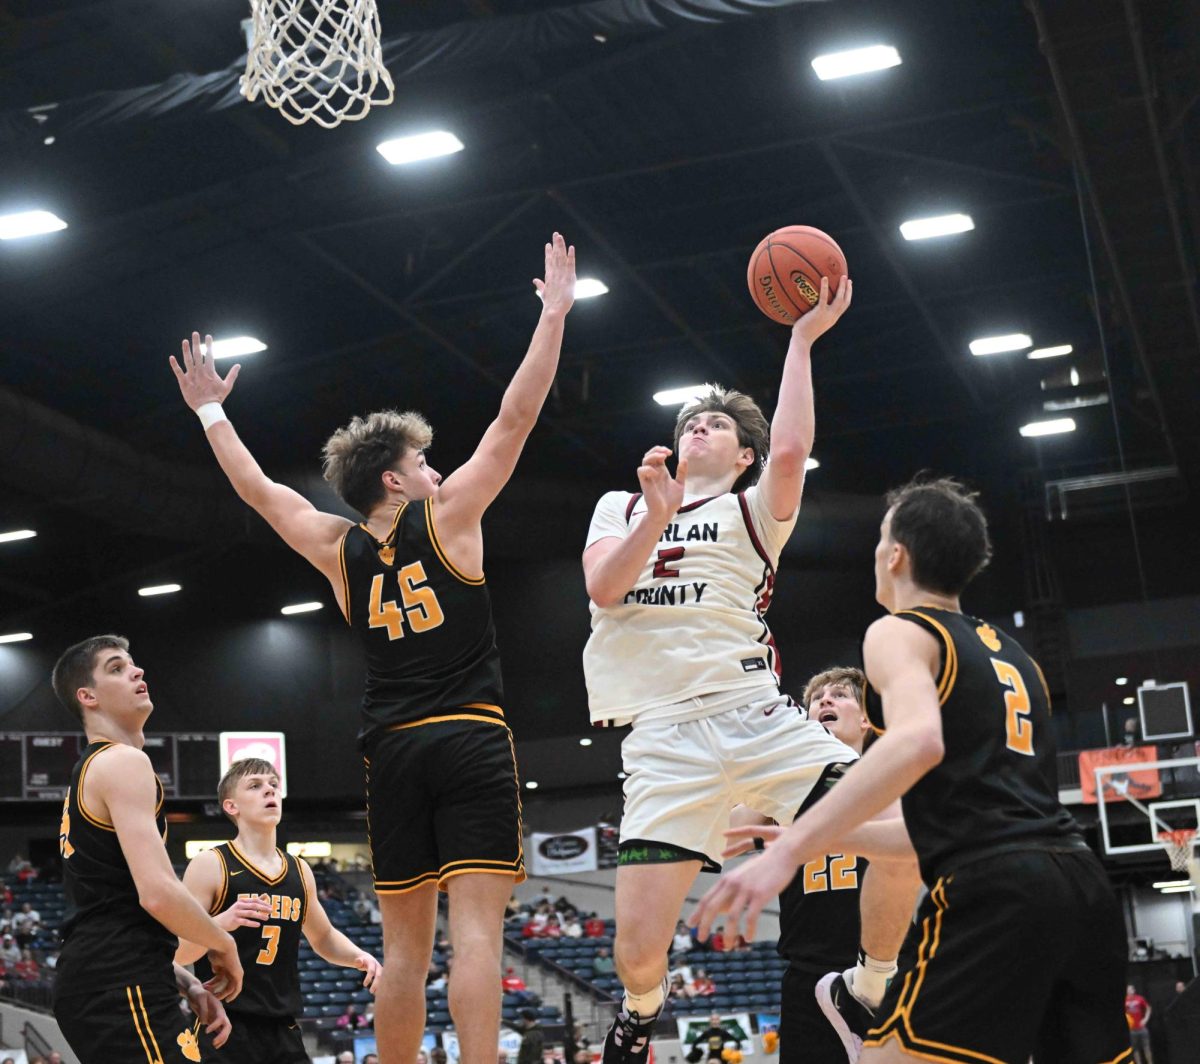 Harlan County guard Trent Noah lofted a shot toward the basket as all five Clay County defenders surrounded him in action from the 13th Region Tournament on Saturday.